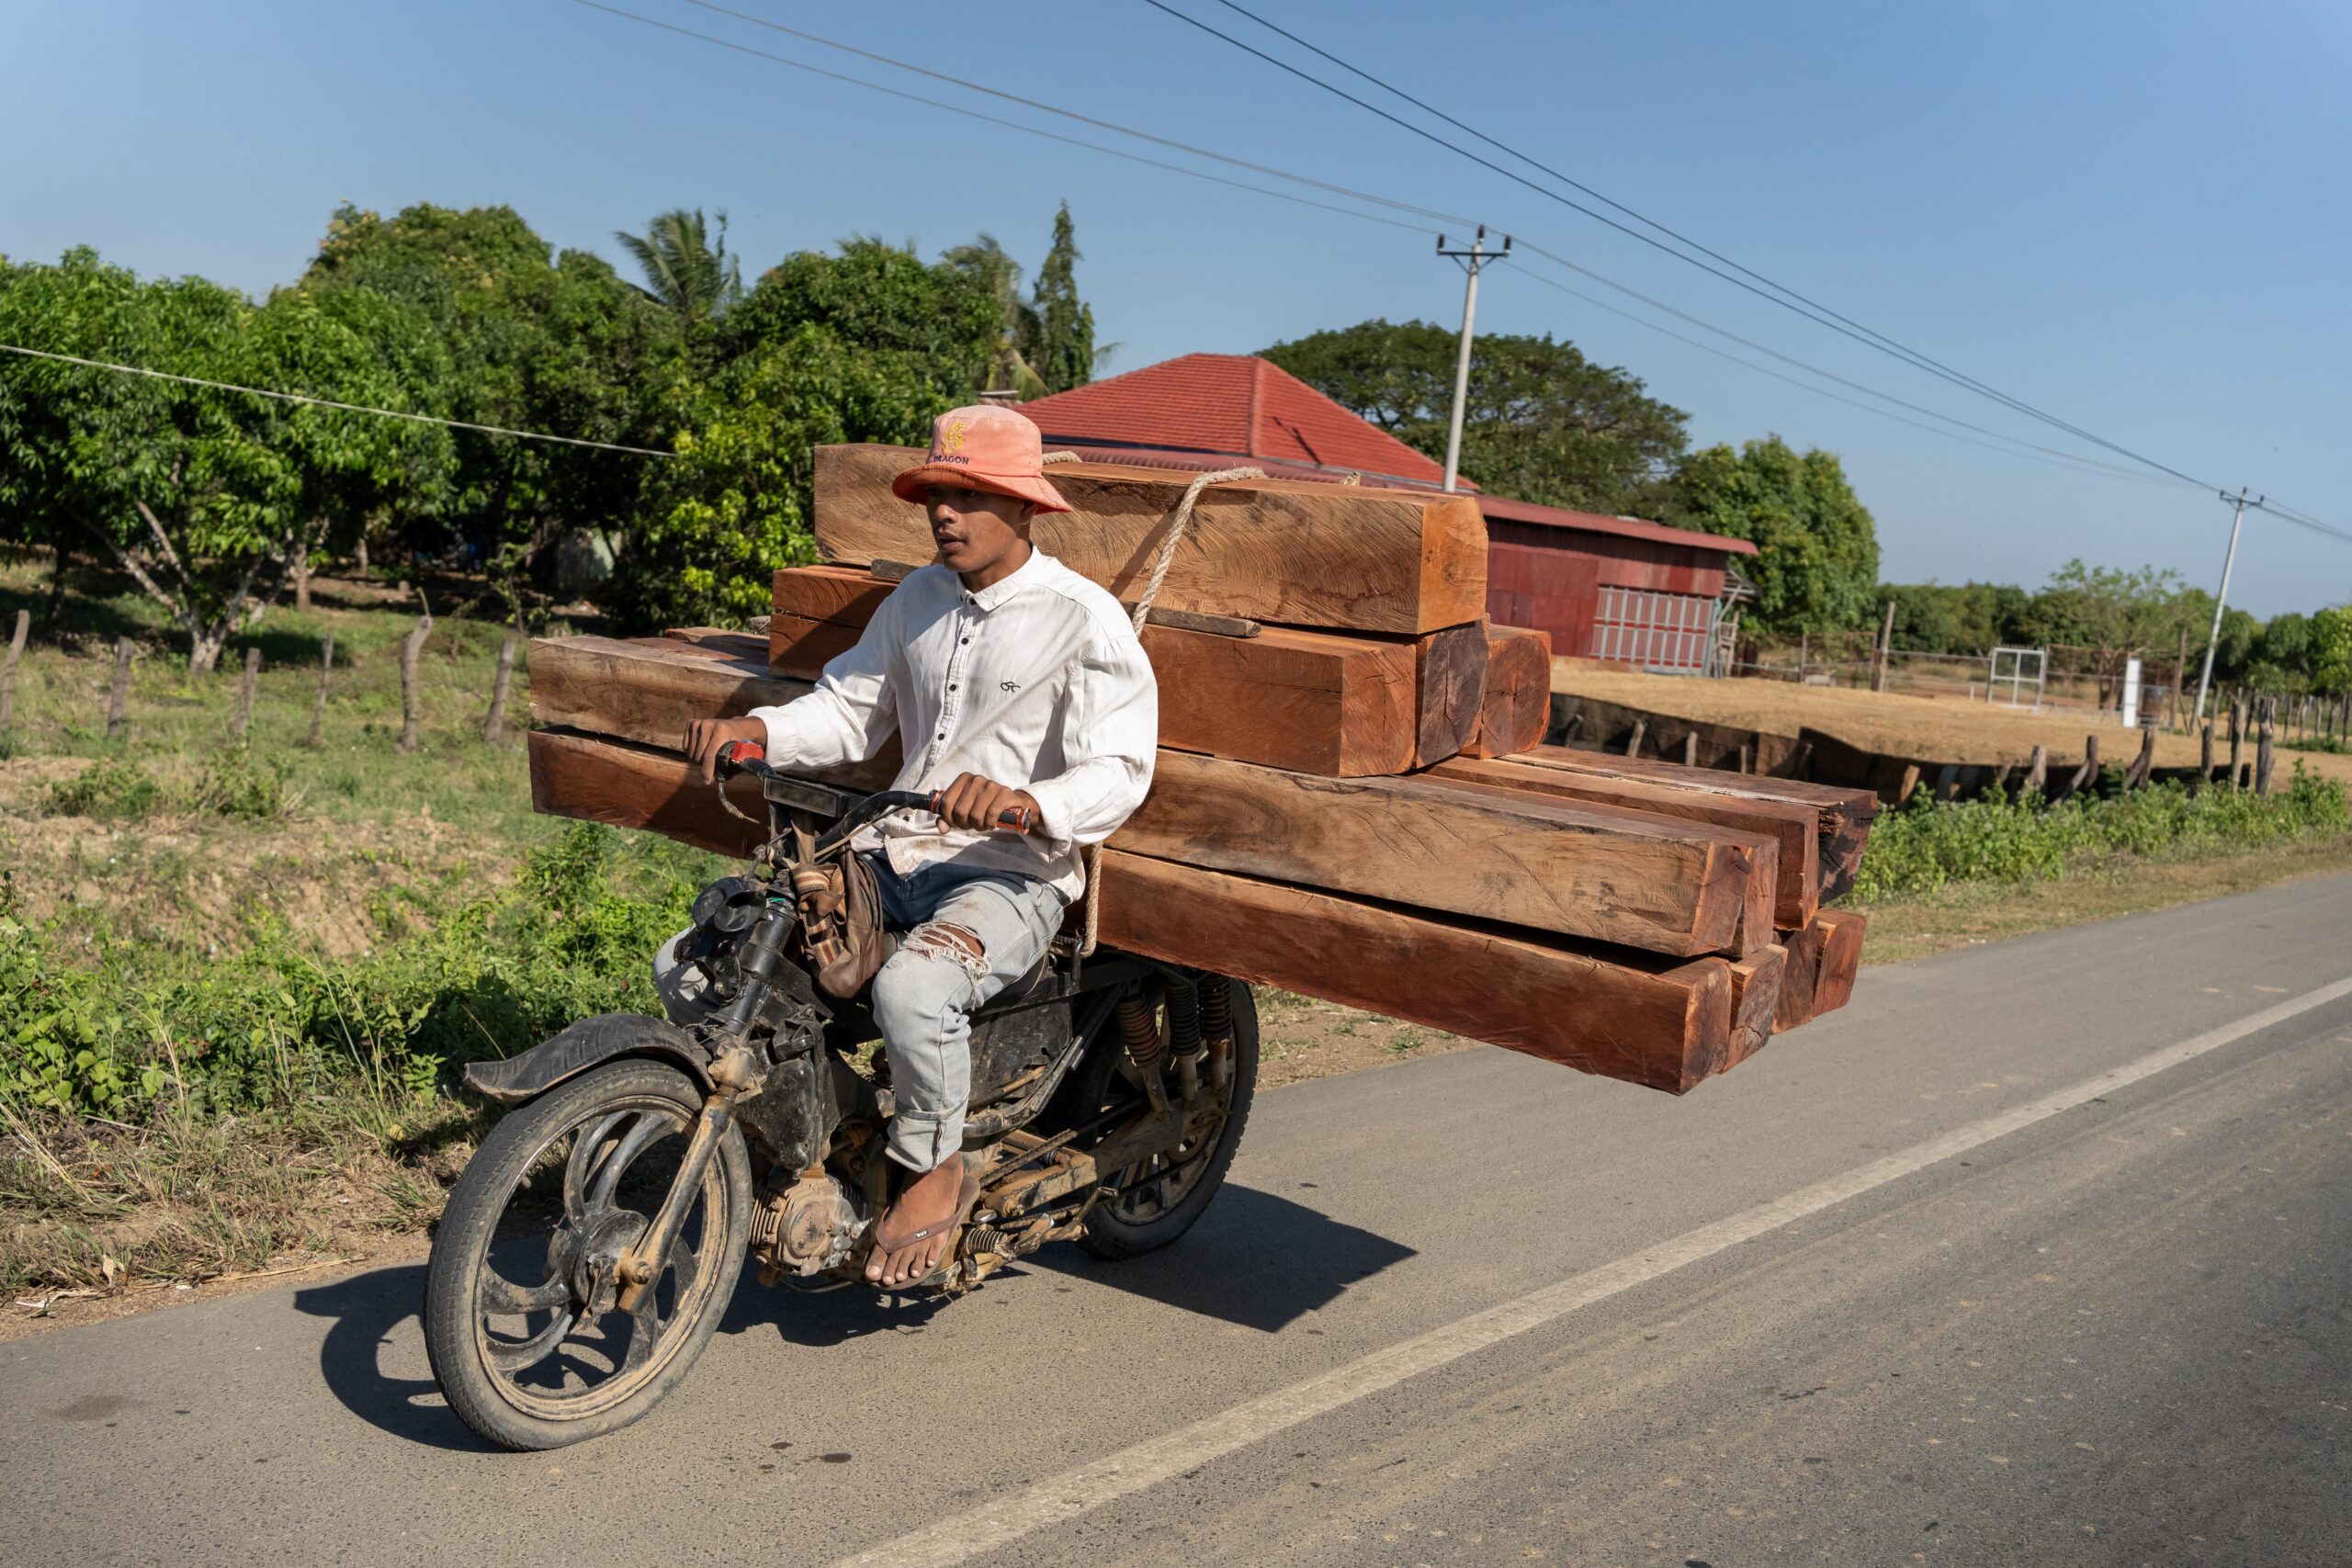 In February 2023, timber was frequently seen being transported by motorbike on National Road 7 that connects the towns of Stung Treng and Kratie. Vast areas of land either side of the road were issued as economic land concessions. Image by Andy Ball / Mongabay.